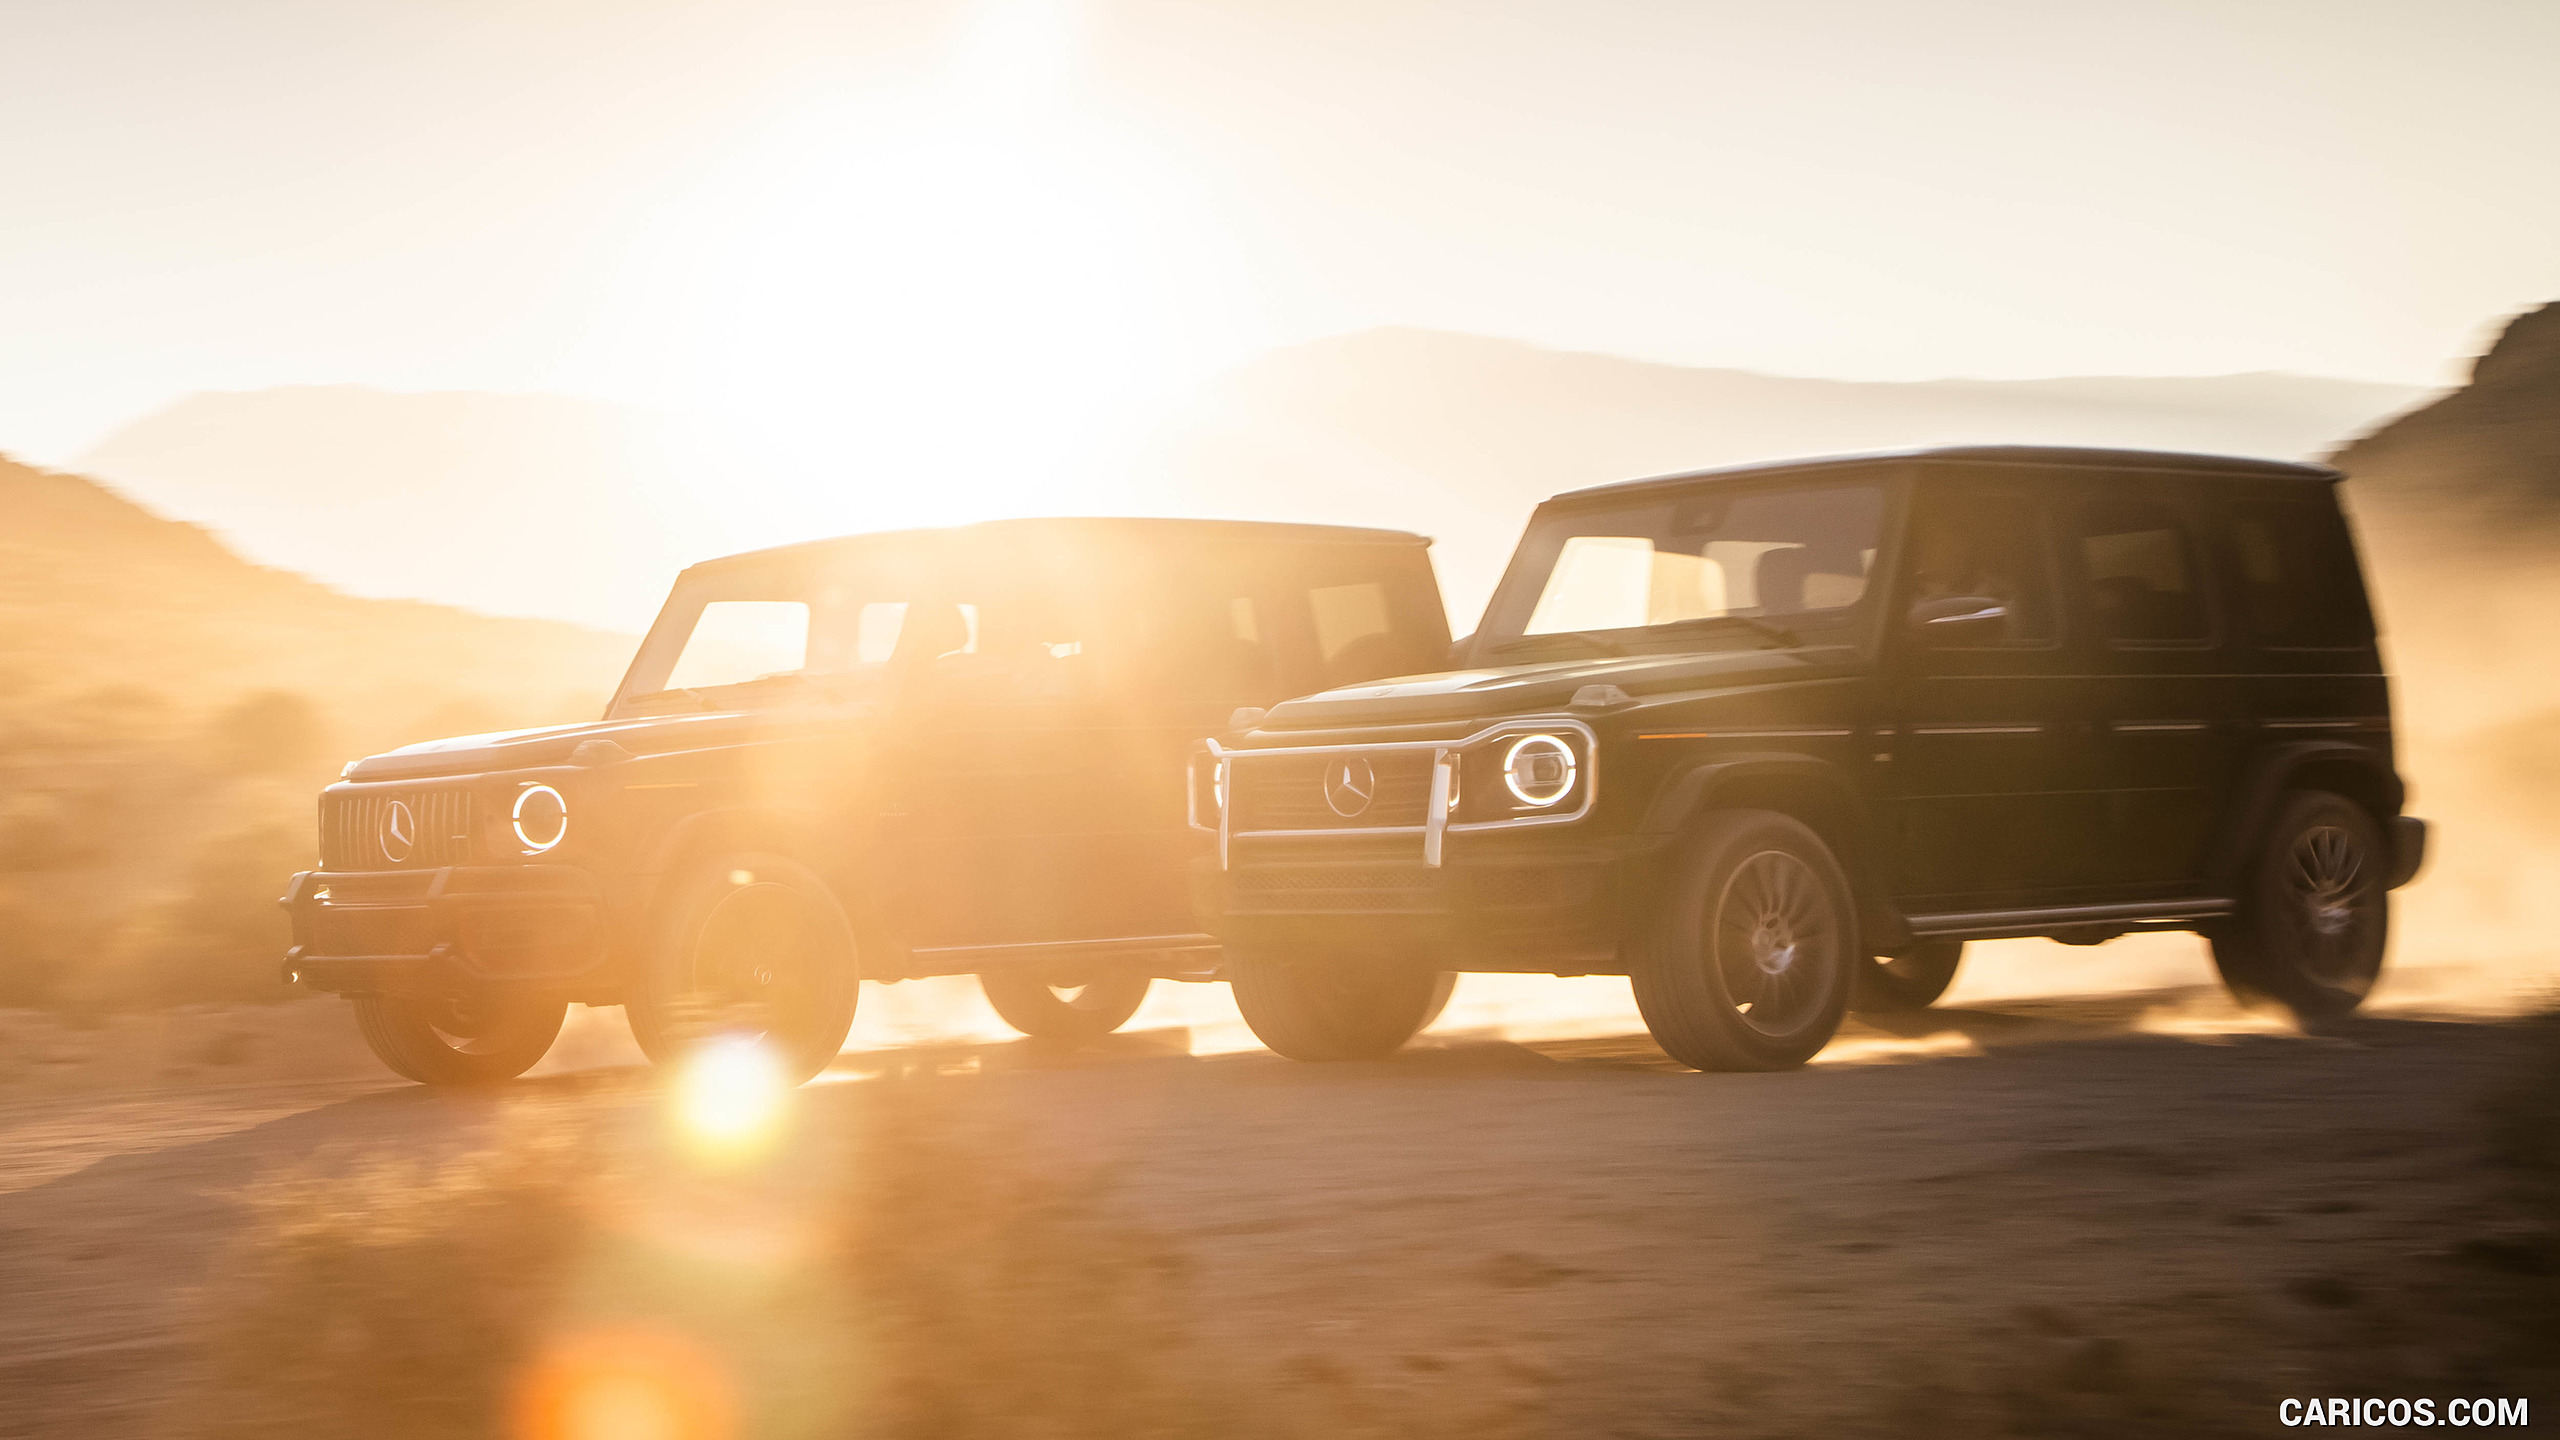 2019 Mercedes-AMG G63 (U.S.-Spec) and 2019 G550, #363 of 452